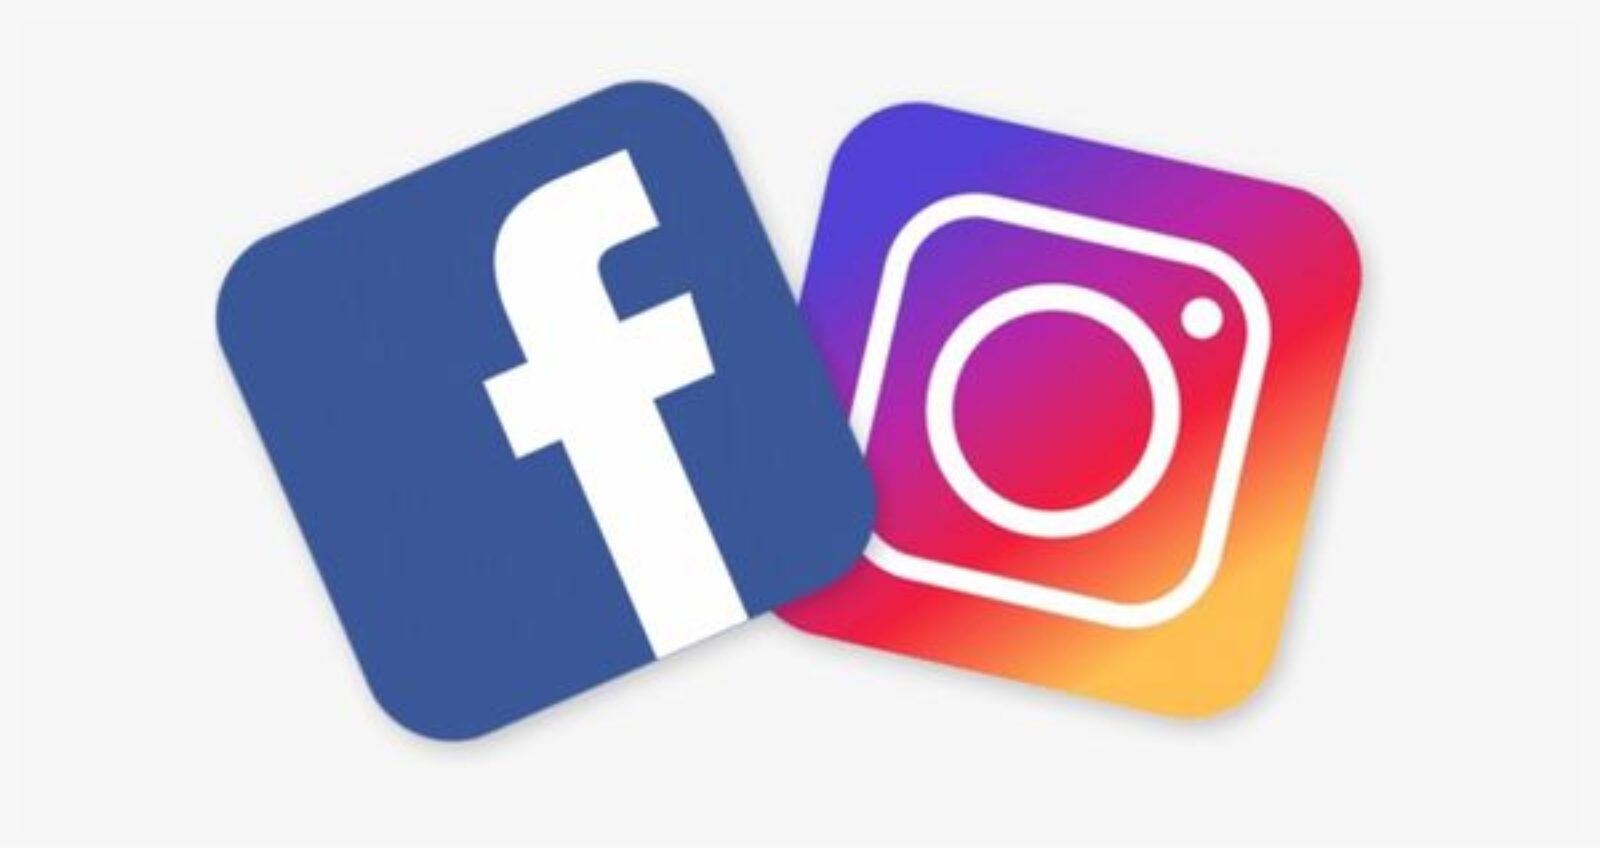 You’re leaving money on the table if you’re not using Instagram in tandem with Facebook for your online marketing.